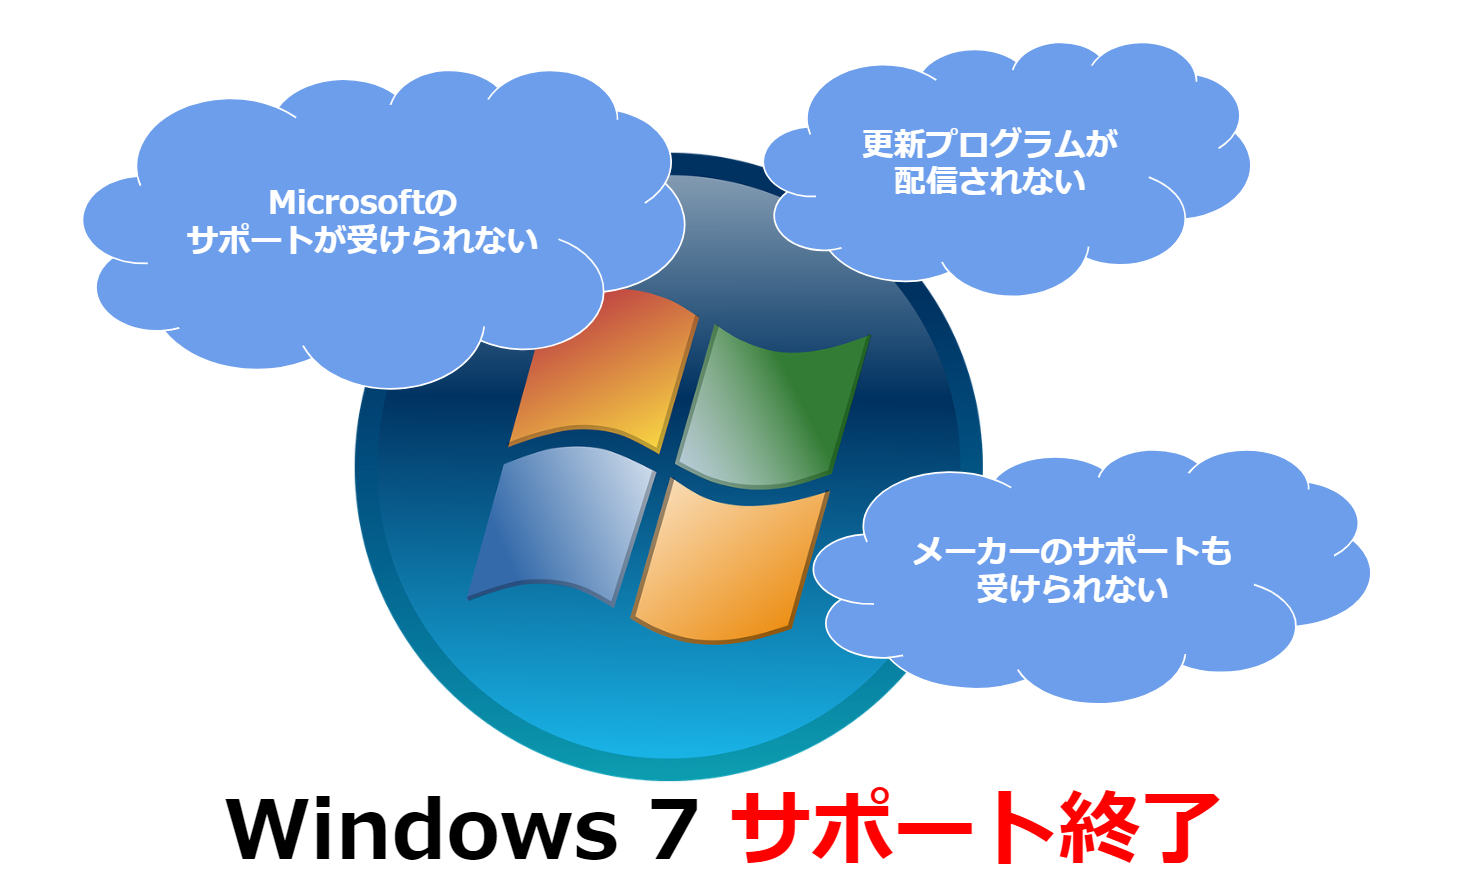 Widnows 7がサポート終了したときのデメリット